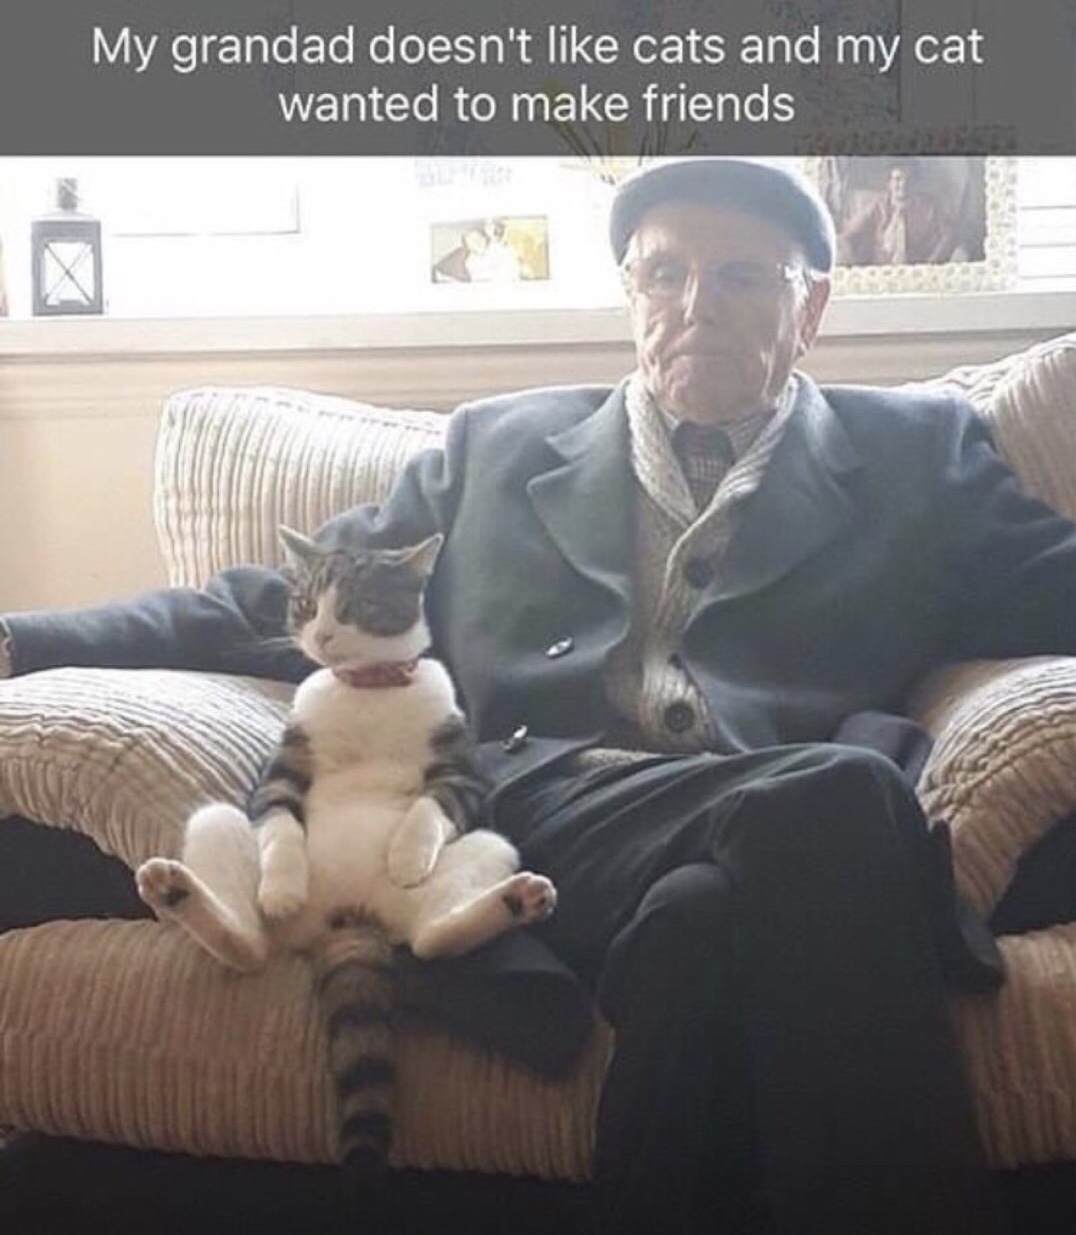 you accidentally open the special ed room meme - My grandad doesn't cats and my cat wanted to make friends